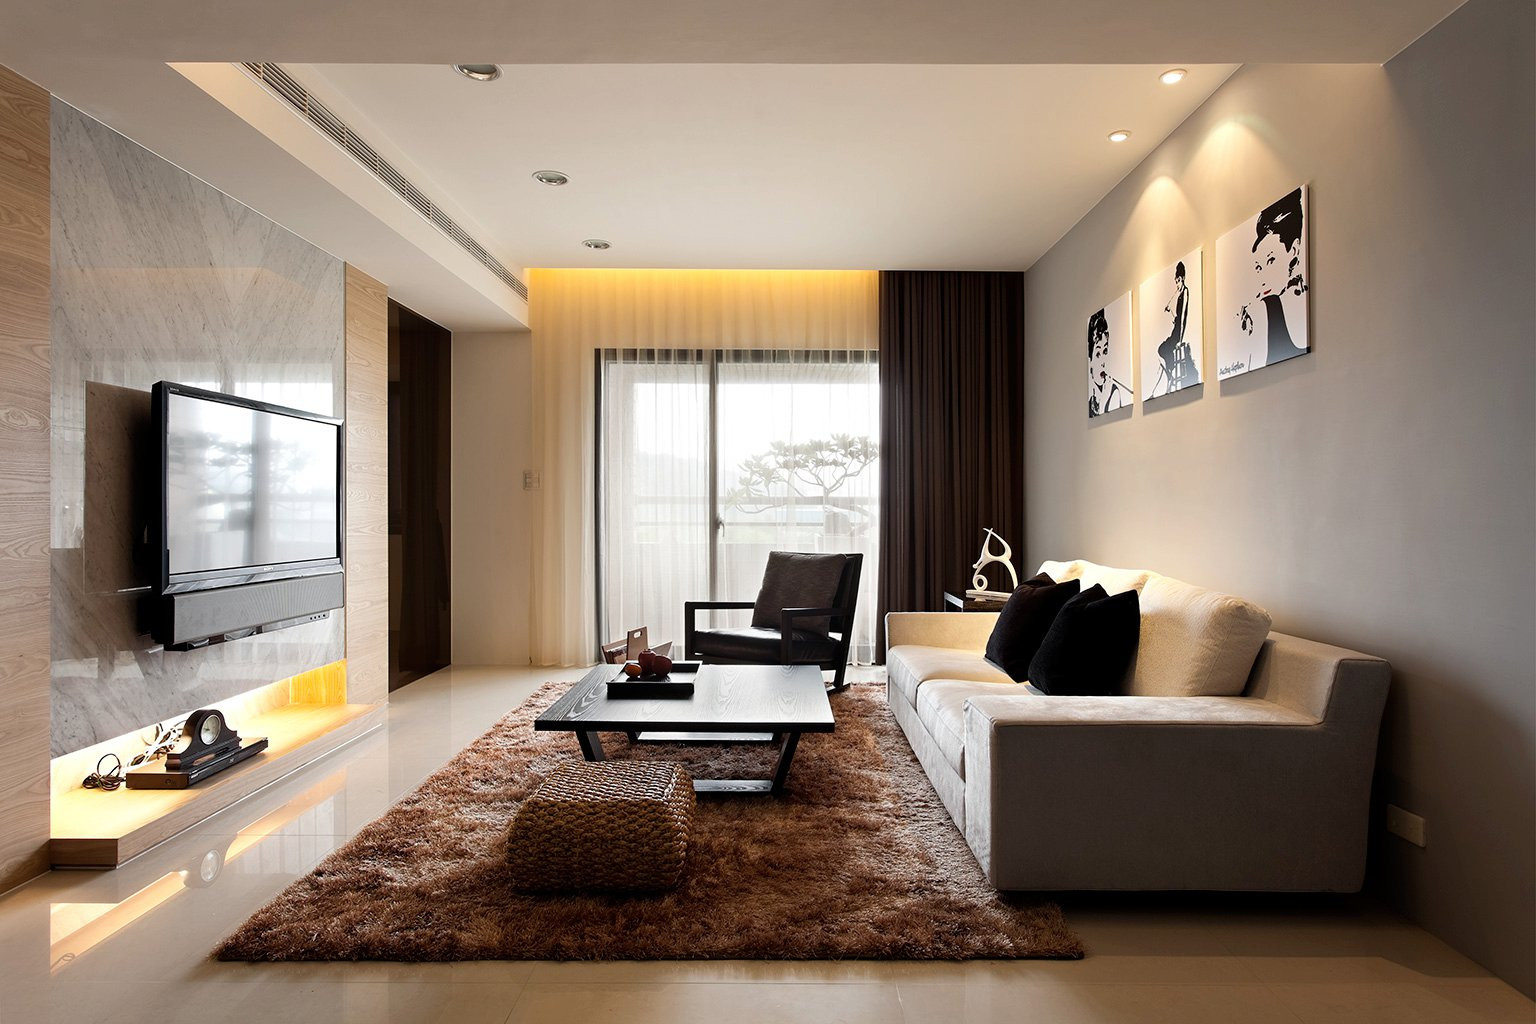 Living Room Decore
 Modern Minimalist Decor with a Homey Flow